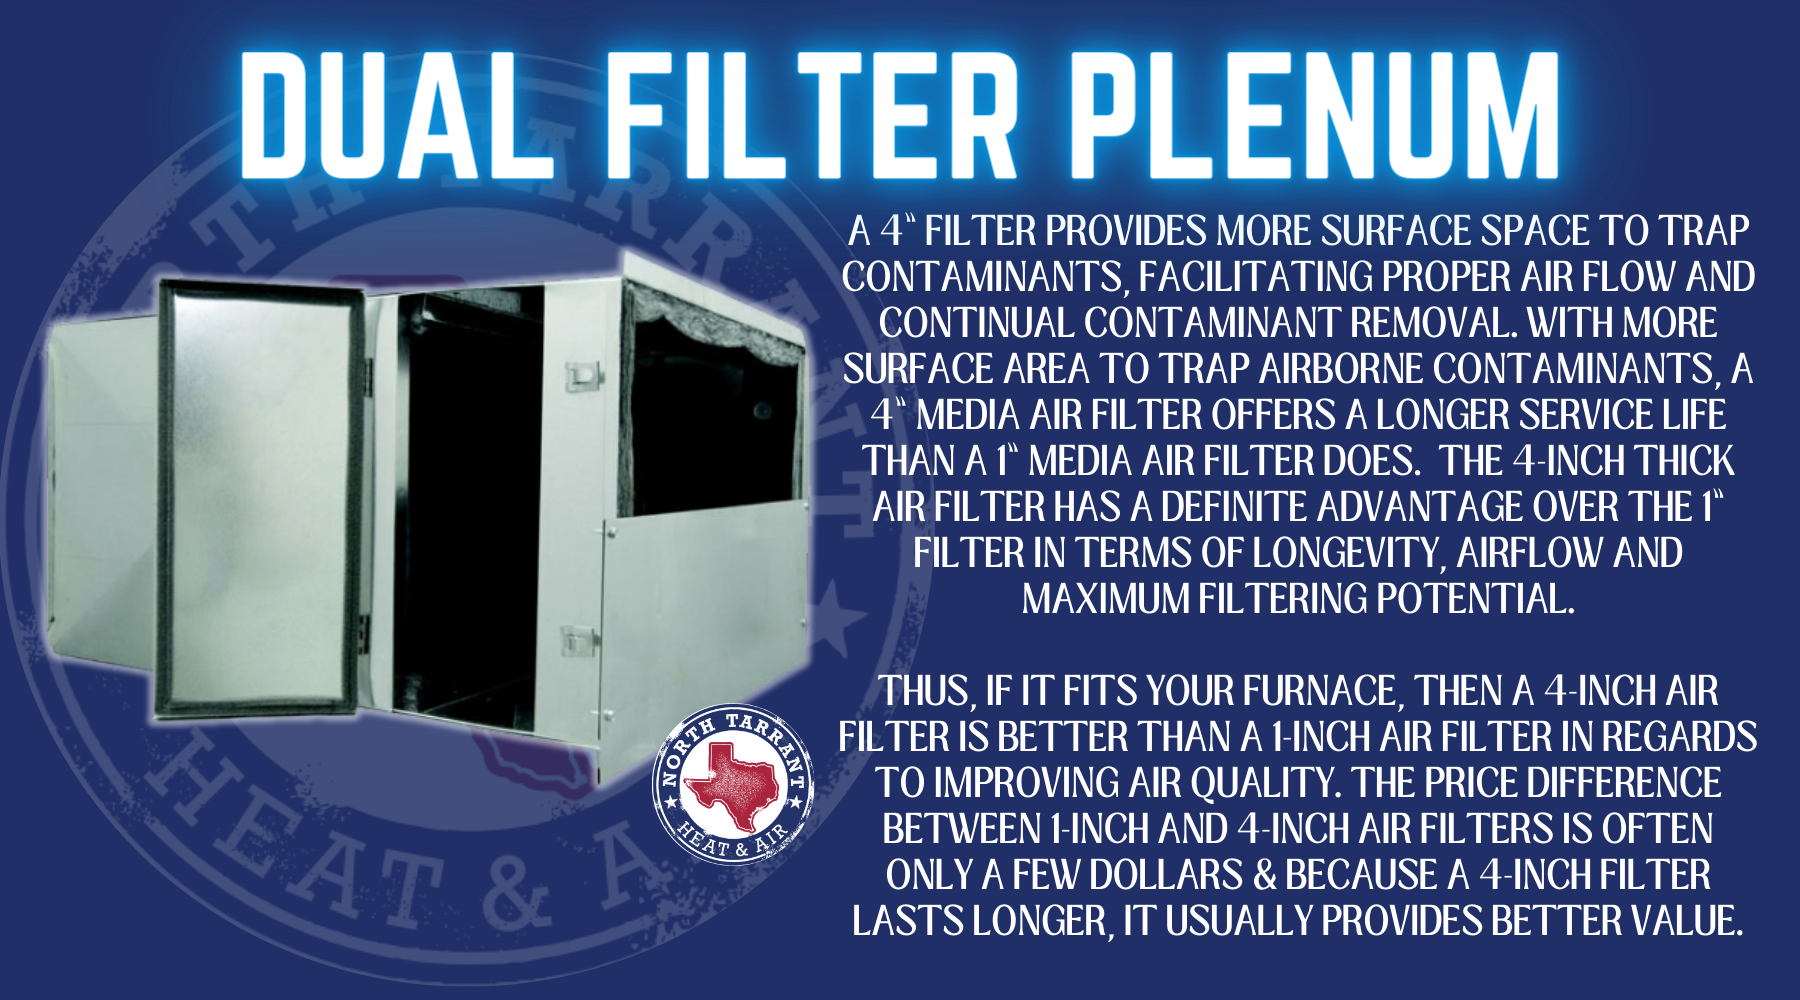 A 4” filter provides more surface space to trap contaminants, facilitating proper air flow and continual contaminant removal. With more surface area to trap airborne contaminants, a 4” media air filter offers a longer service life than a 1” media air filter does. The 4-inch thick air filter has a definite advantage over the 1” filter in terms of longevity, airflow and maximum filtering potential. Thus, if it fits your furnace, then a 4-inch air filter is better than a 1-inch air filter in regards to improving air quality. the price difference between 1-inch and 4-inch air filters is often only a few dollars & Because a 4-inch filter lasts longer, it usually provides better value.